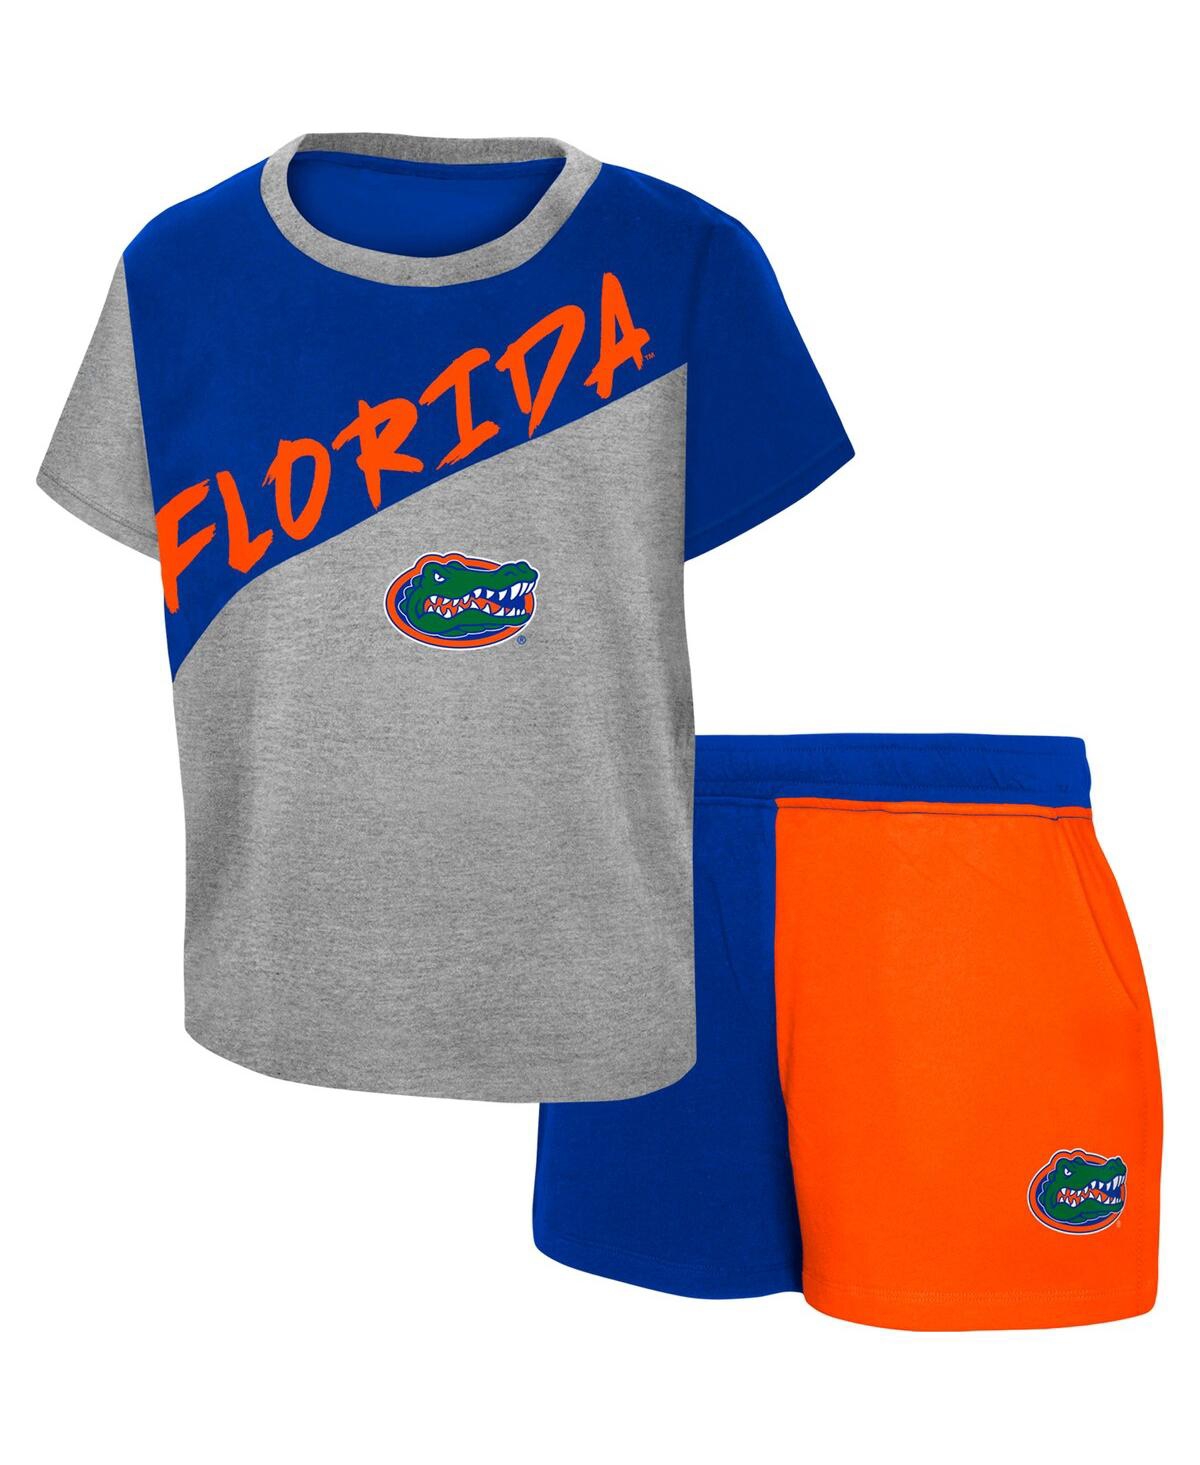 Outerstuff Babies' Toddler Boys And Girls Heather Gray Florida Gators Super Star T-shirt And Shorts Set